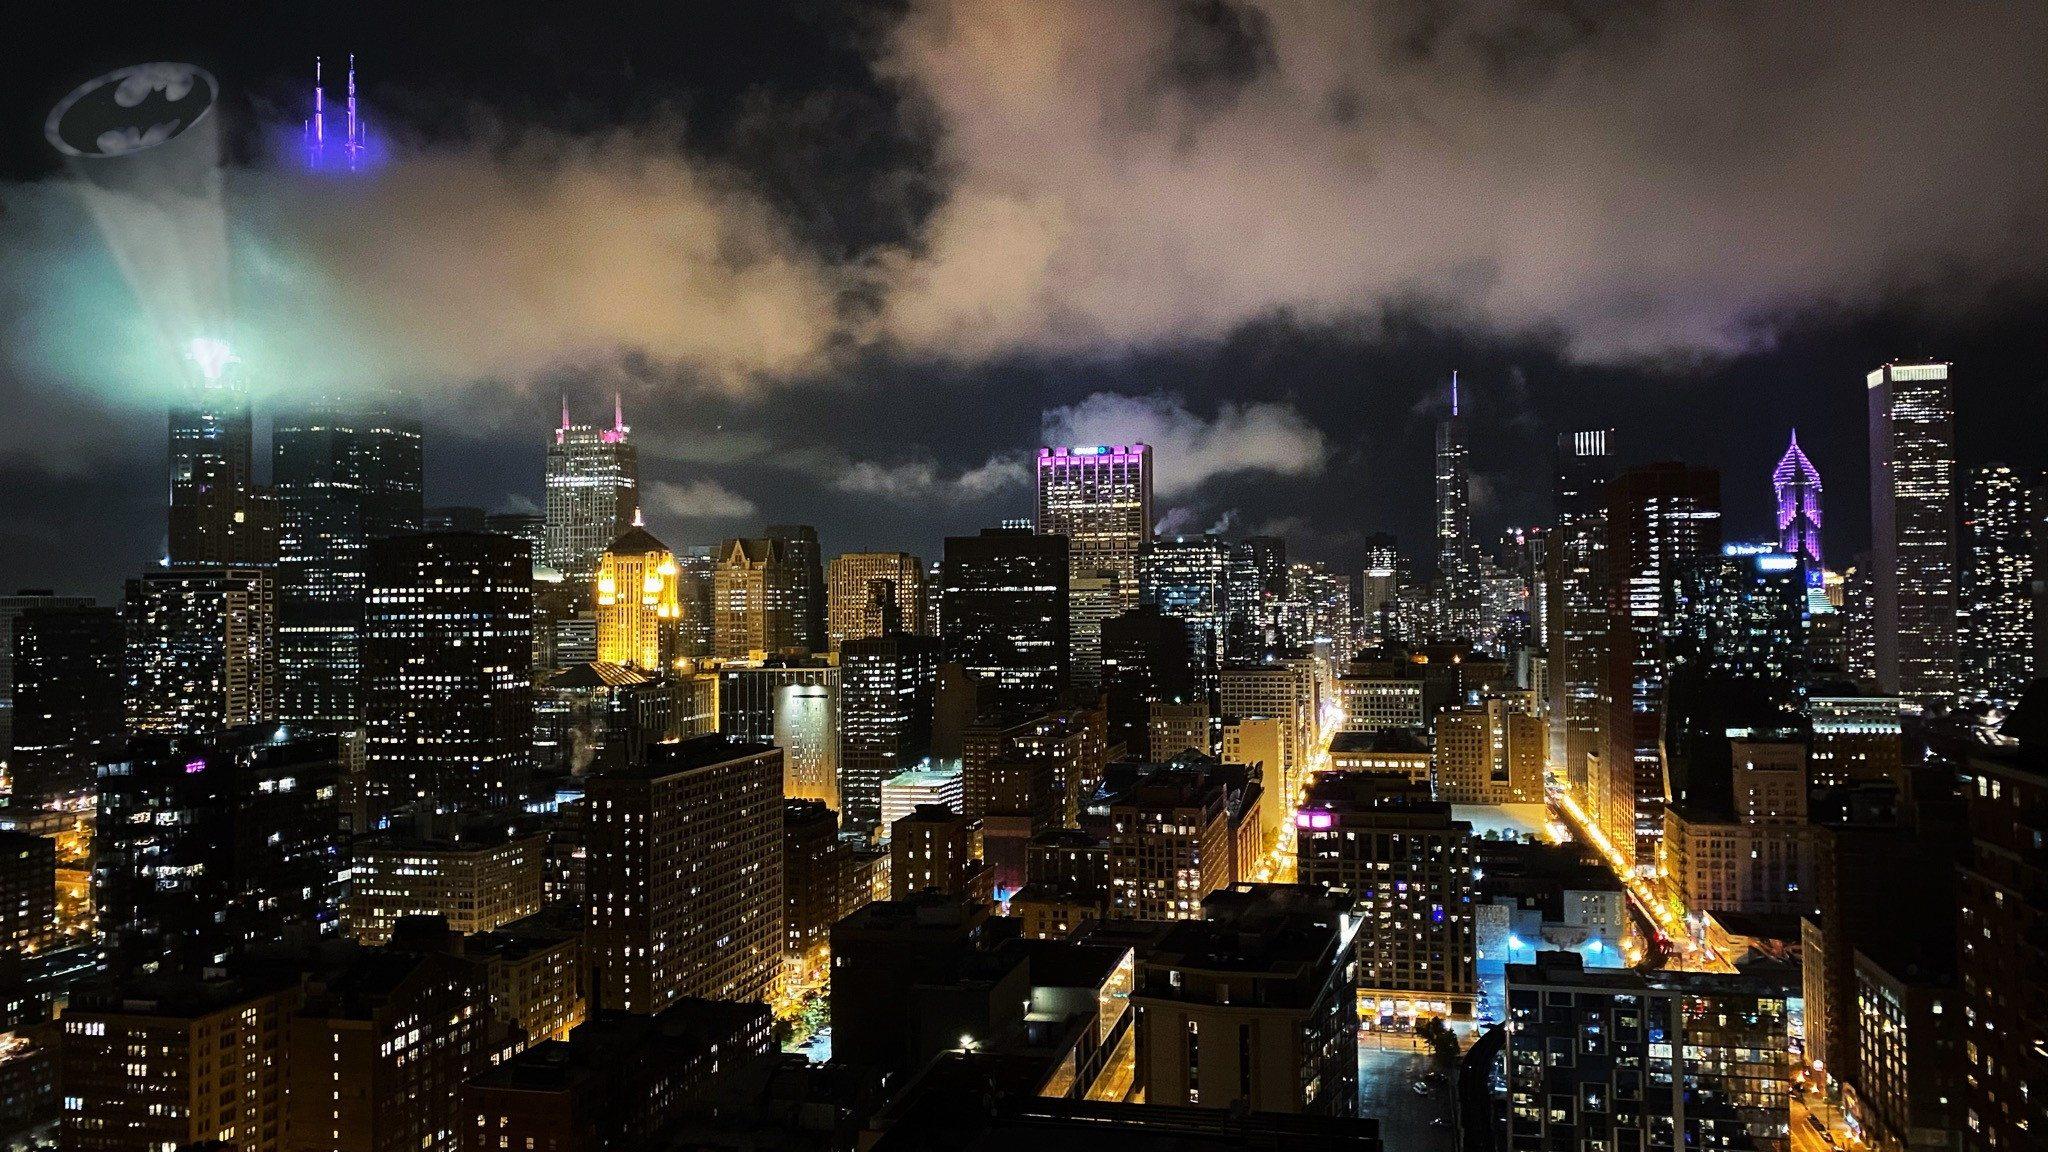 The iconic bat signal seen above the city skyline as “The Batman” films in Chicago. (Photo submitted by Nick Murphy)